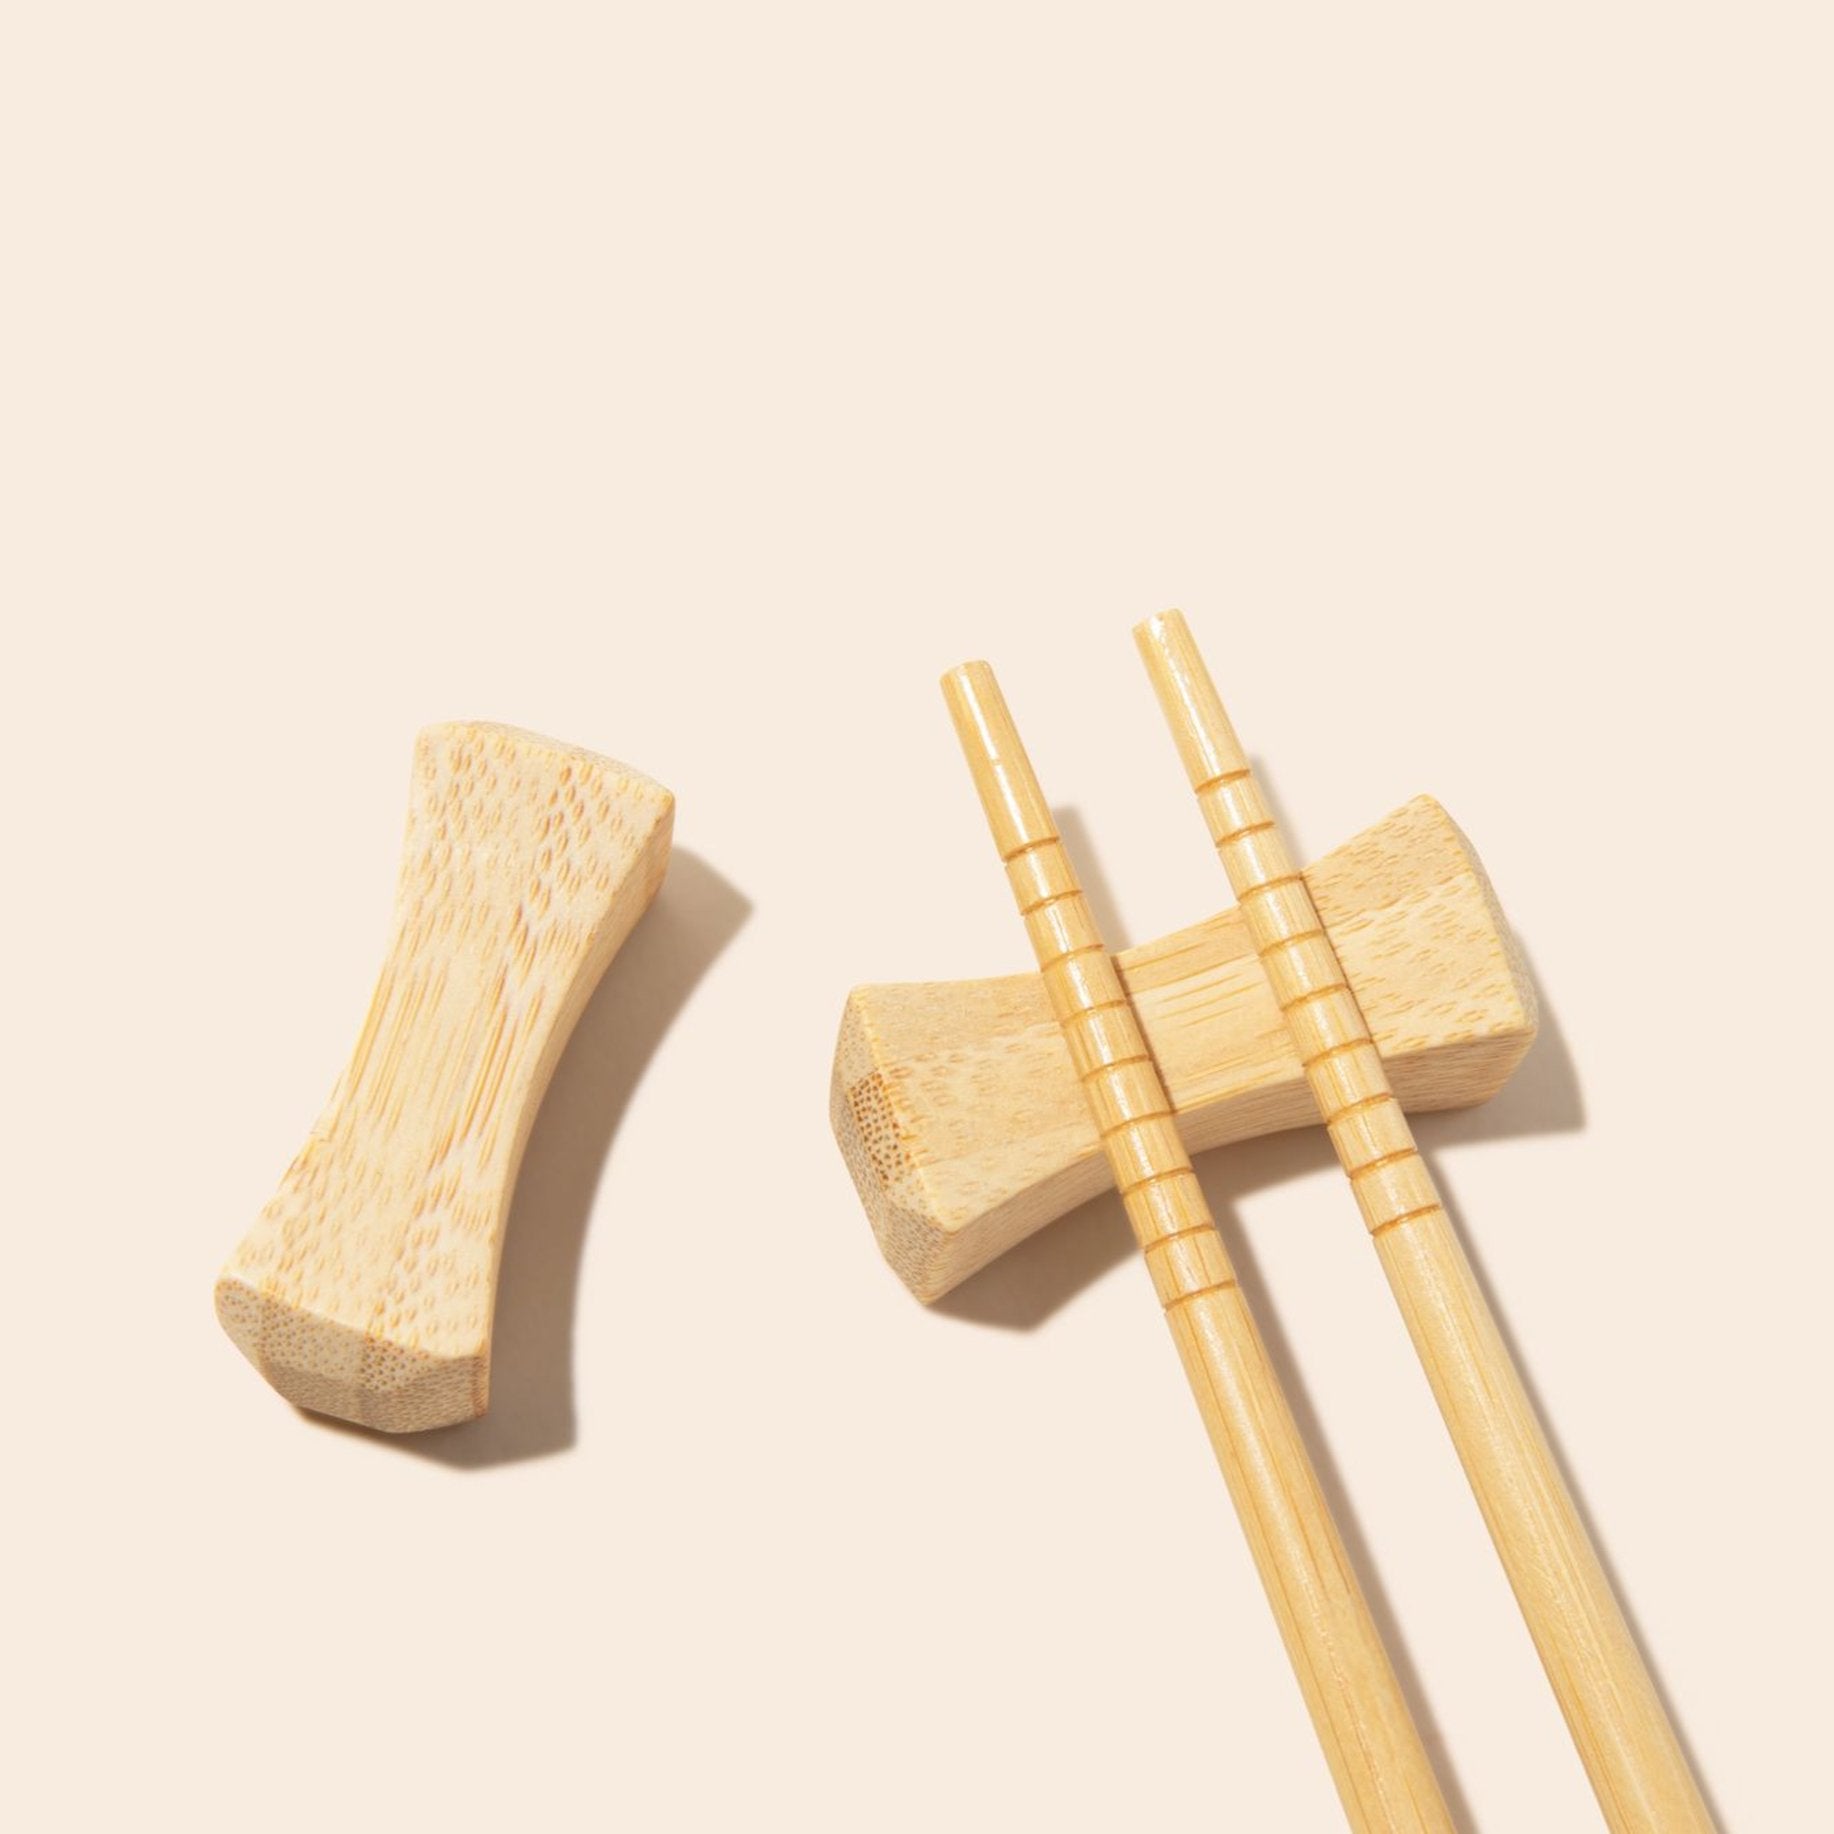 sustainable, zero waste, earth-friendly, plastic-free Bamboo Chopstick Rest | Set of 2 - Bamboo Switch